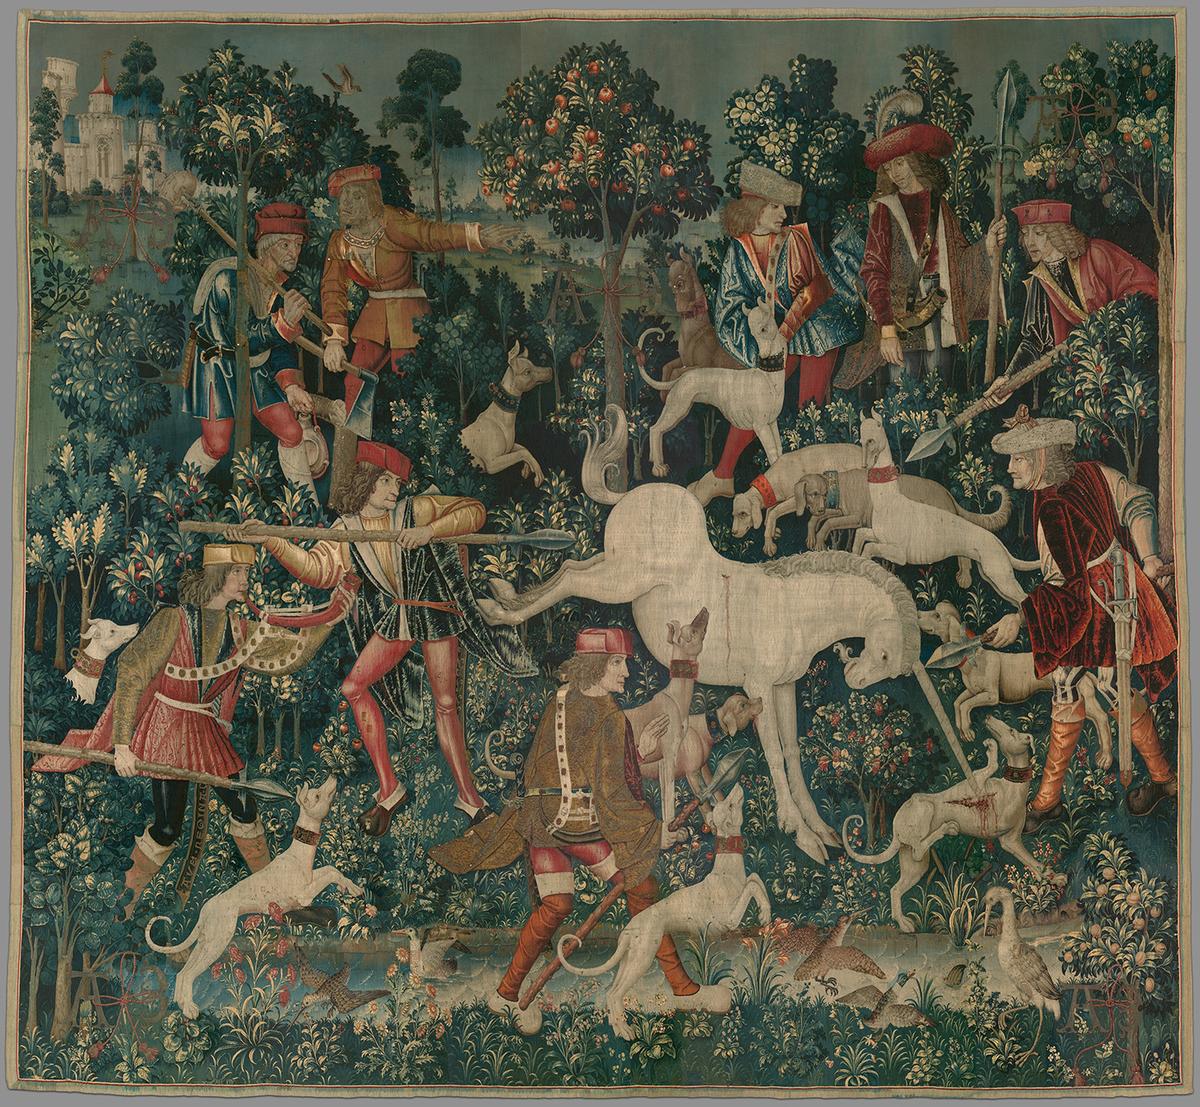 There are 101 different plant species rendered in the tapestry cycle, with 84 having been identified. "The Unicorn Defends Himself," (1495–1505). Wool warp with wool silk, silk, silver, and gilt wefts; 145 inches by 158 inches. Gift of John D. Rockefeller Jr. (1937), The Met Cloisters. (Public Domain)